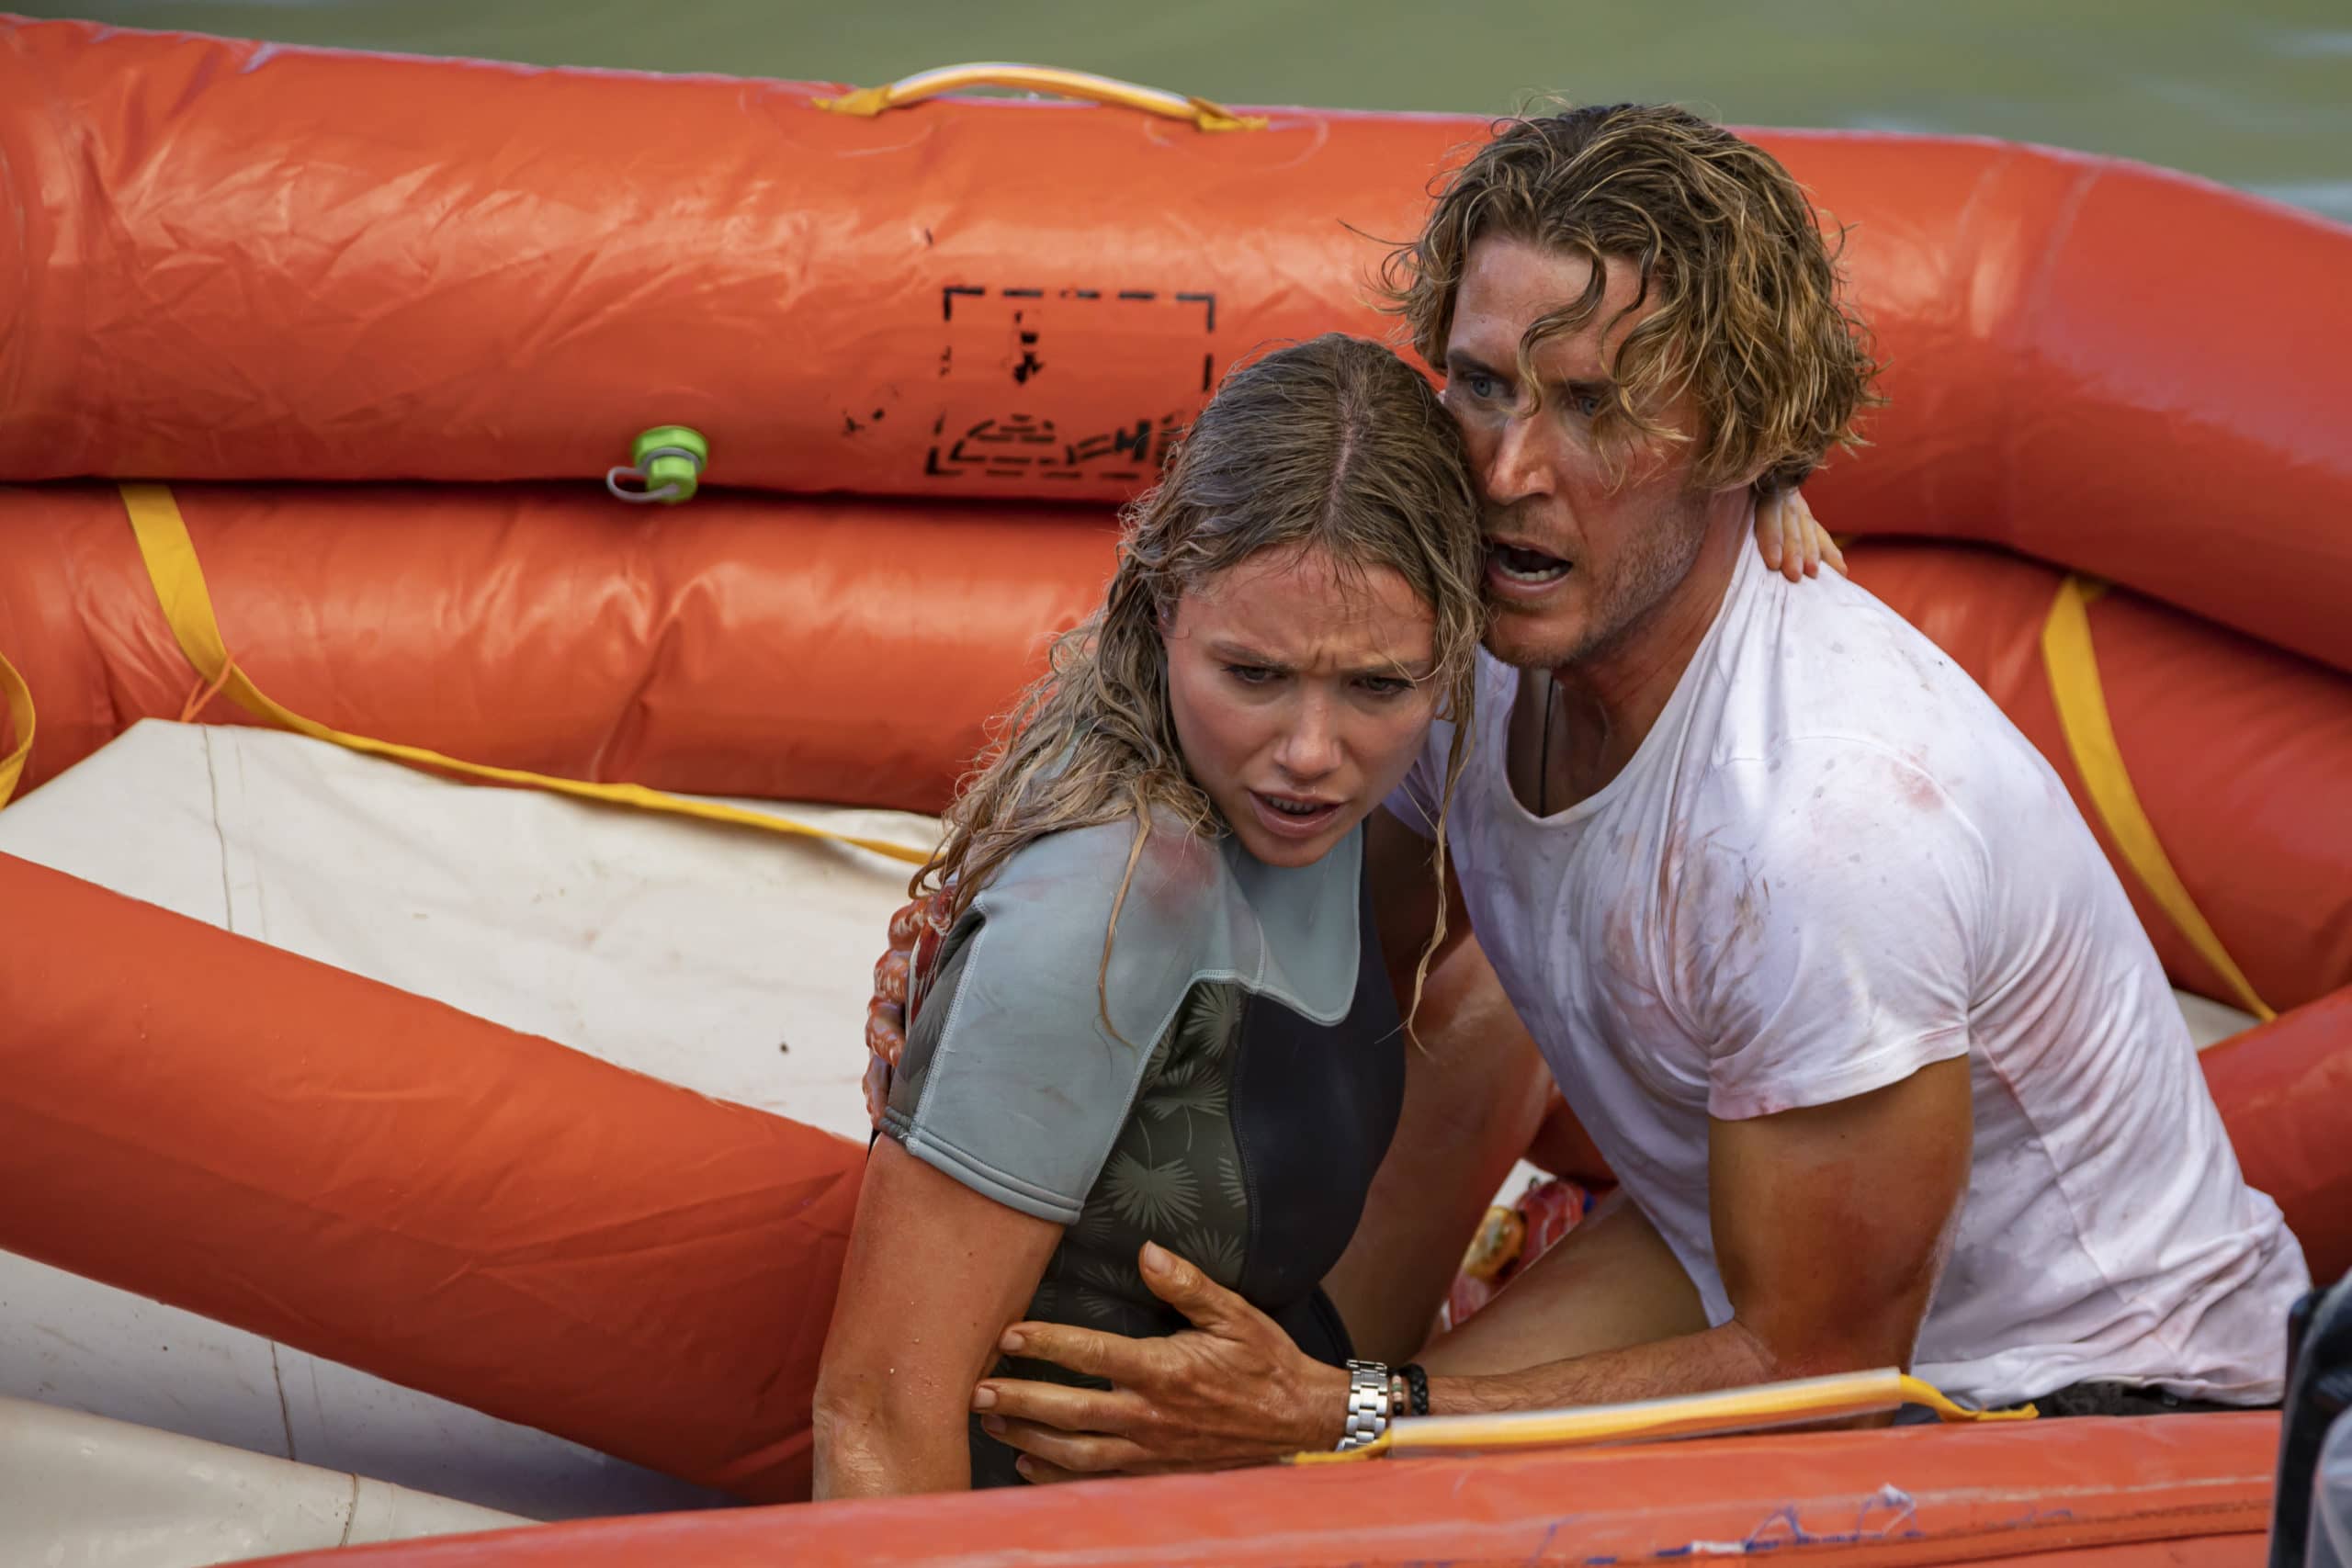 (L-R) Katrina Bowden as Kaz and Aaron Jakubenko as Charlie in the actionadventure/ thriller, GREAT WHITE, an RLJE Films and Shudder release. Photo courtesy of RLJE Films and Shudder.